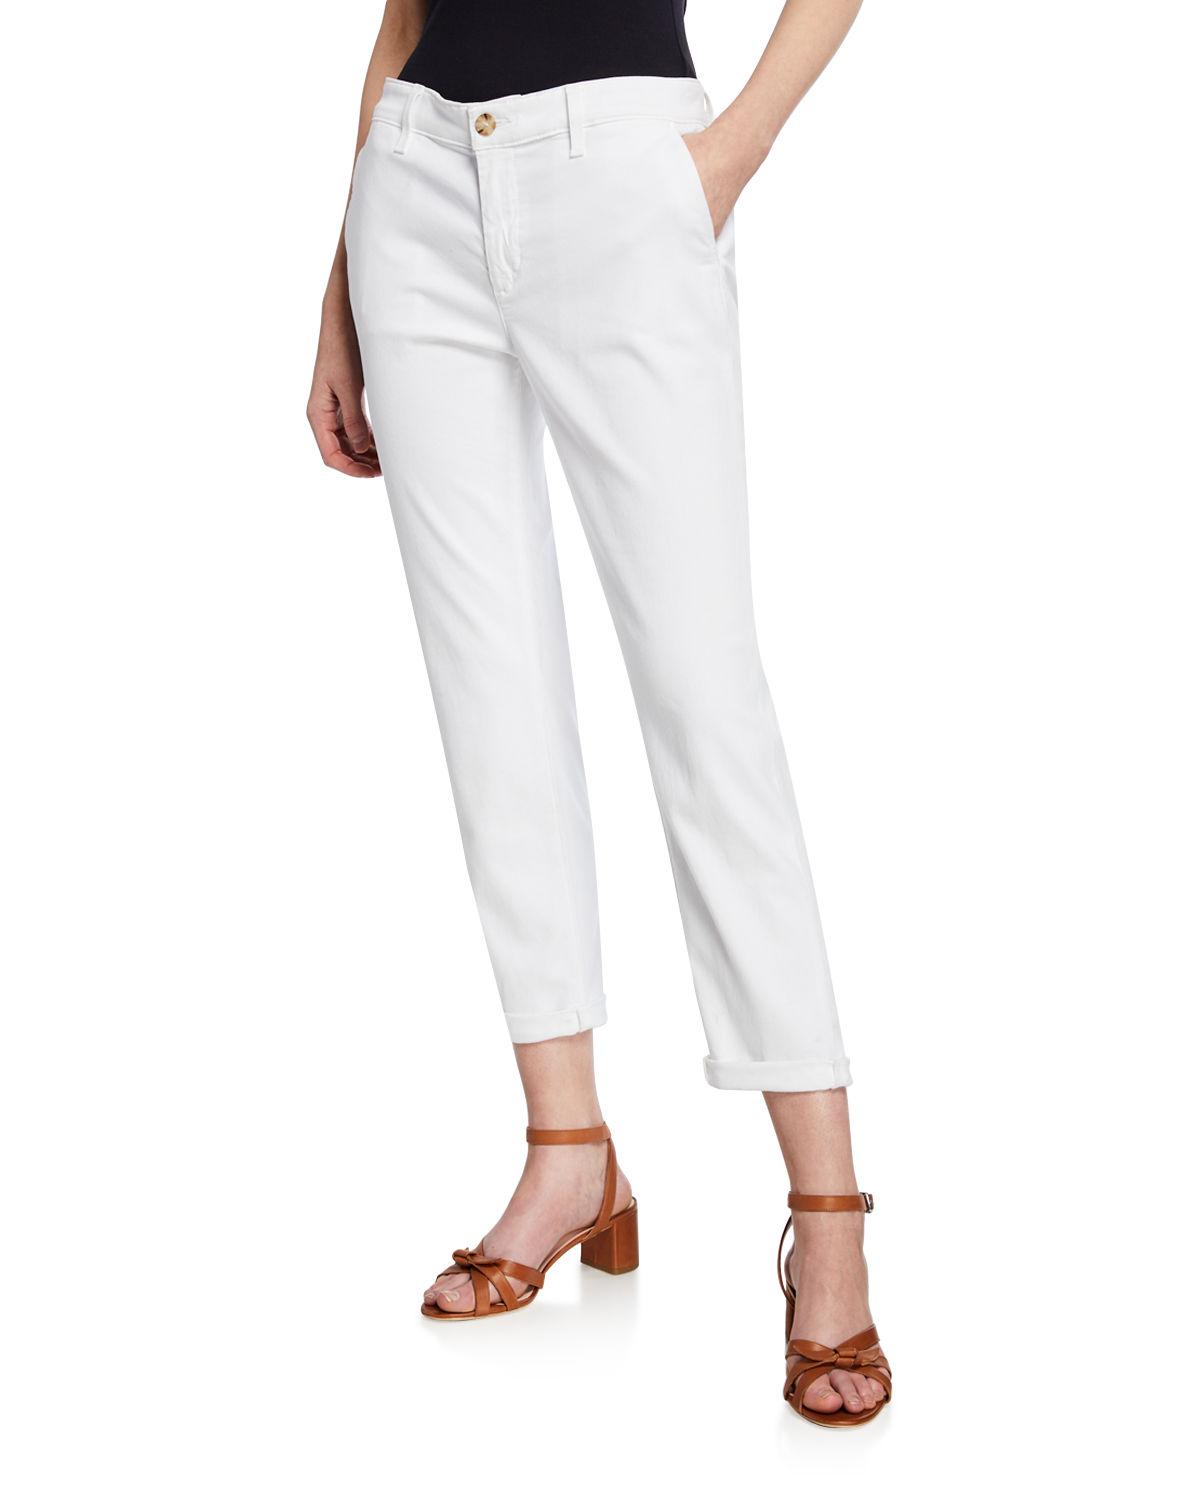 Lyst - AG Jeans The Caden Tailored Denim Trousers in White